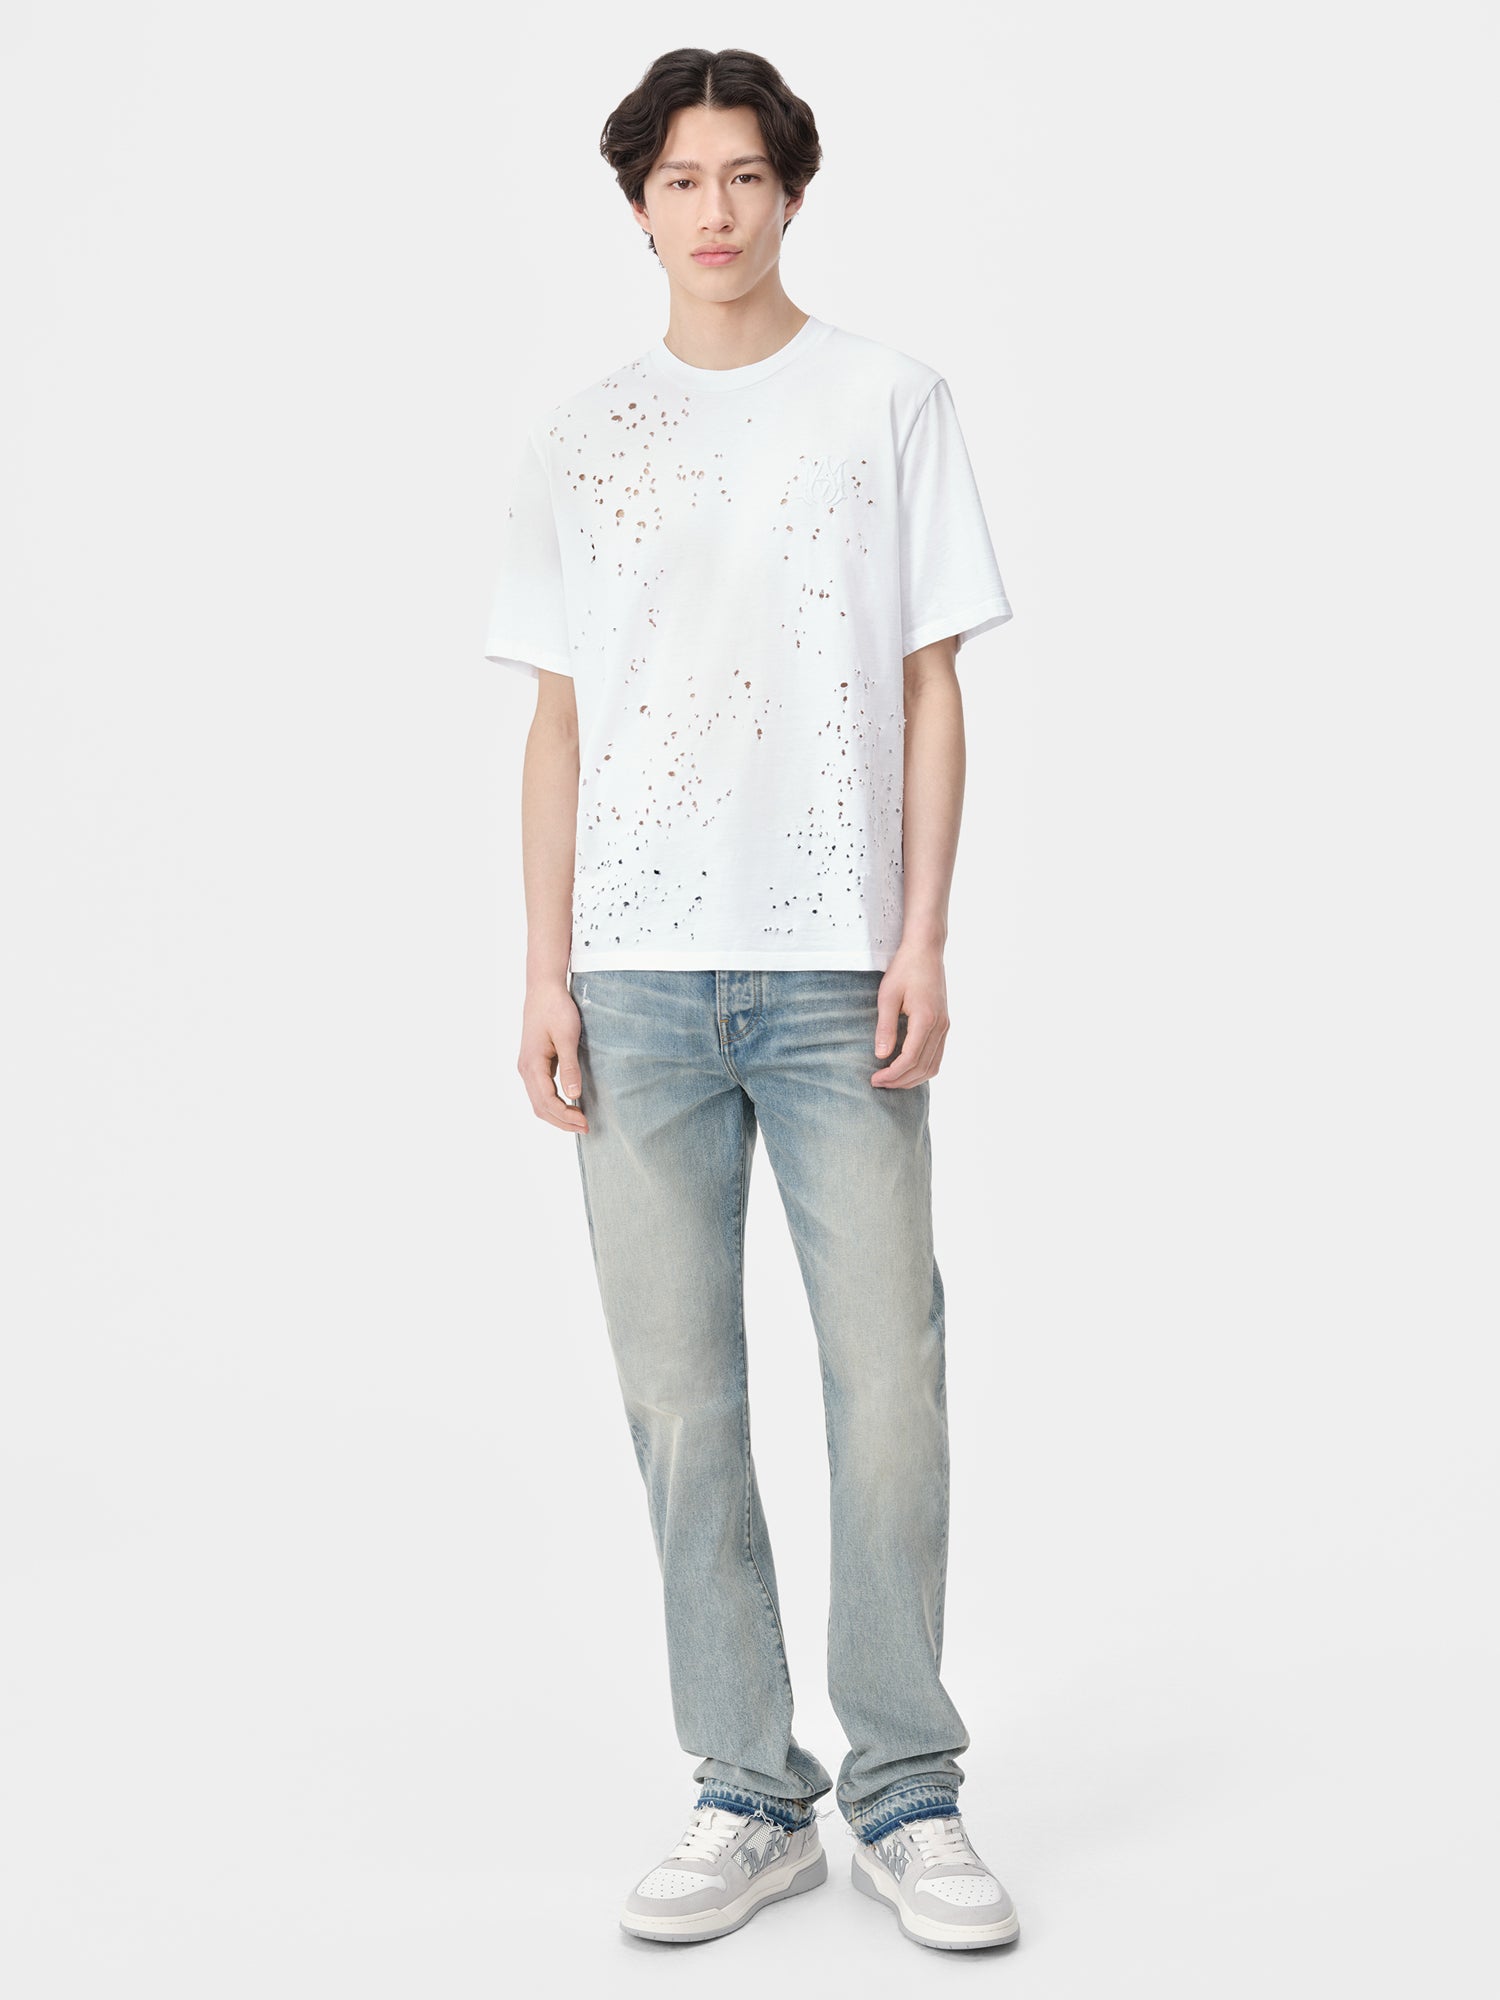 Product MA SHOTGUN EMBROIDERED TEE - White featured image